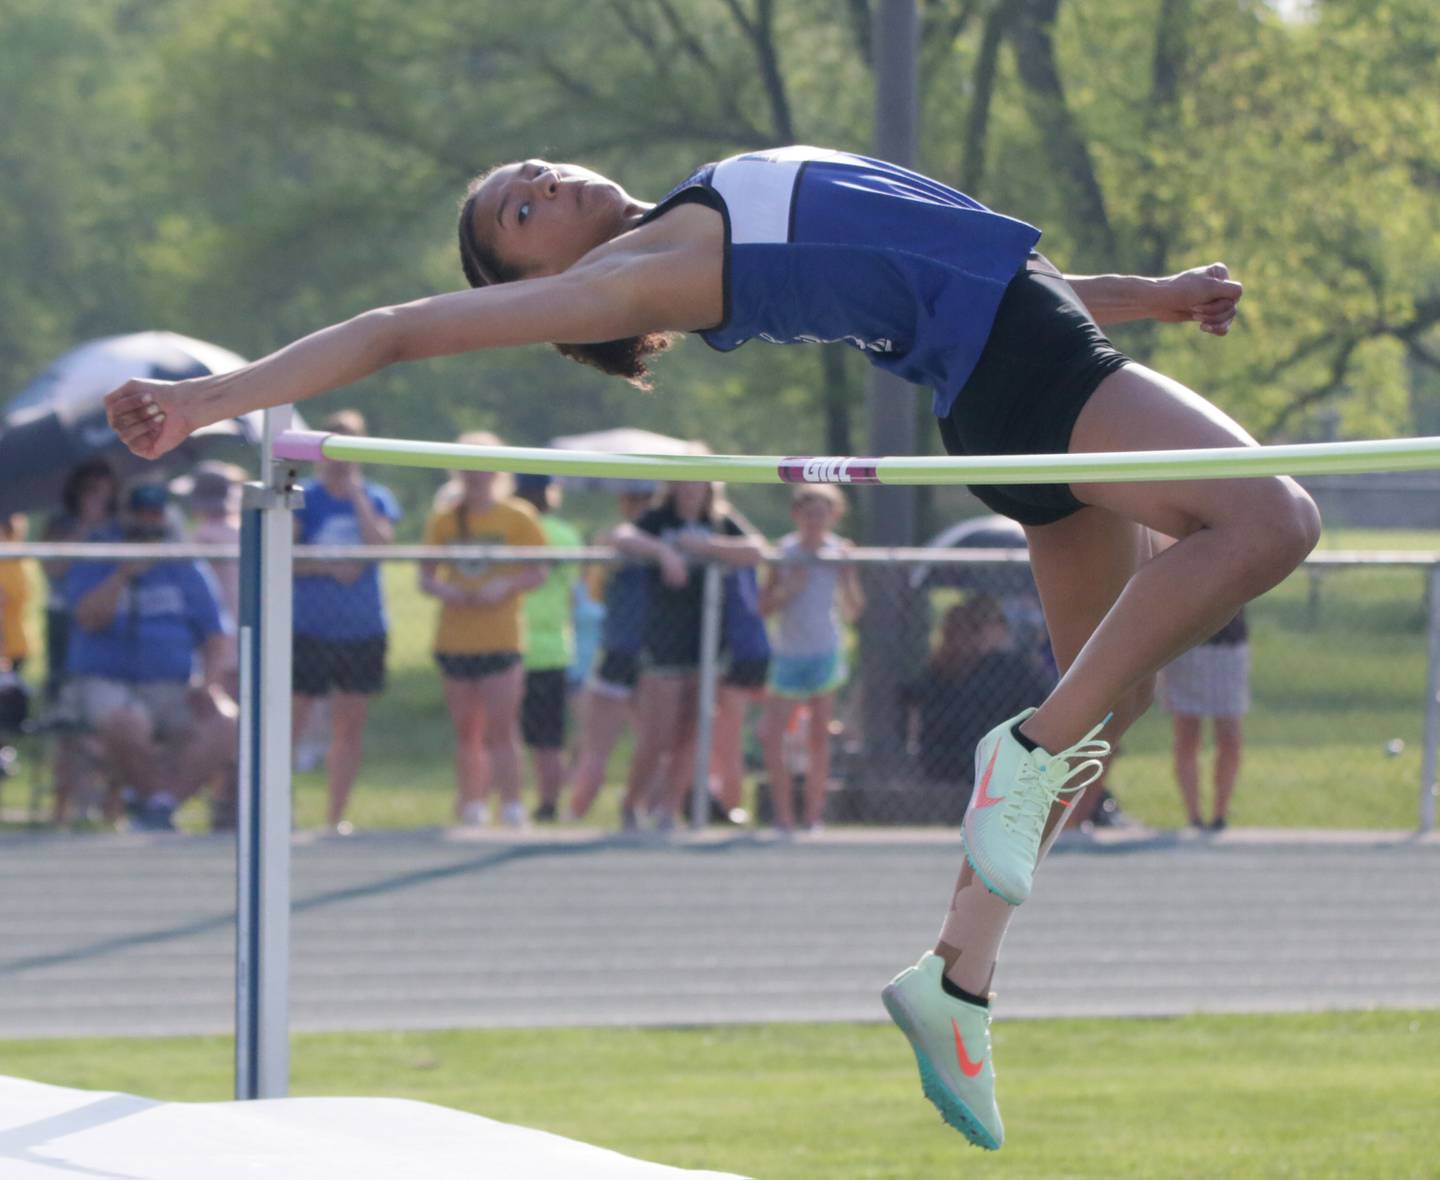 Newark's Kiara Wesseh arches to clear the bar in the high jump at the Class 1A sectional girls track meet on Thursday, May 12, 2022, in Seneca.